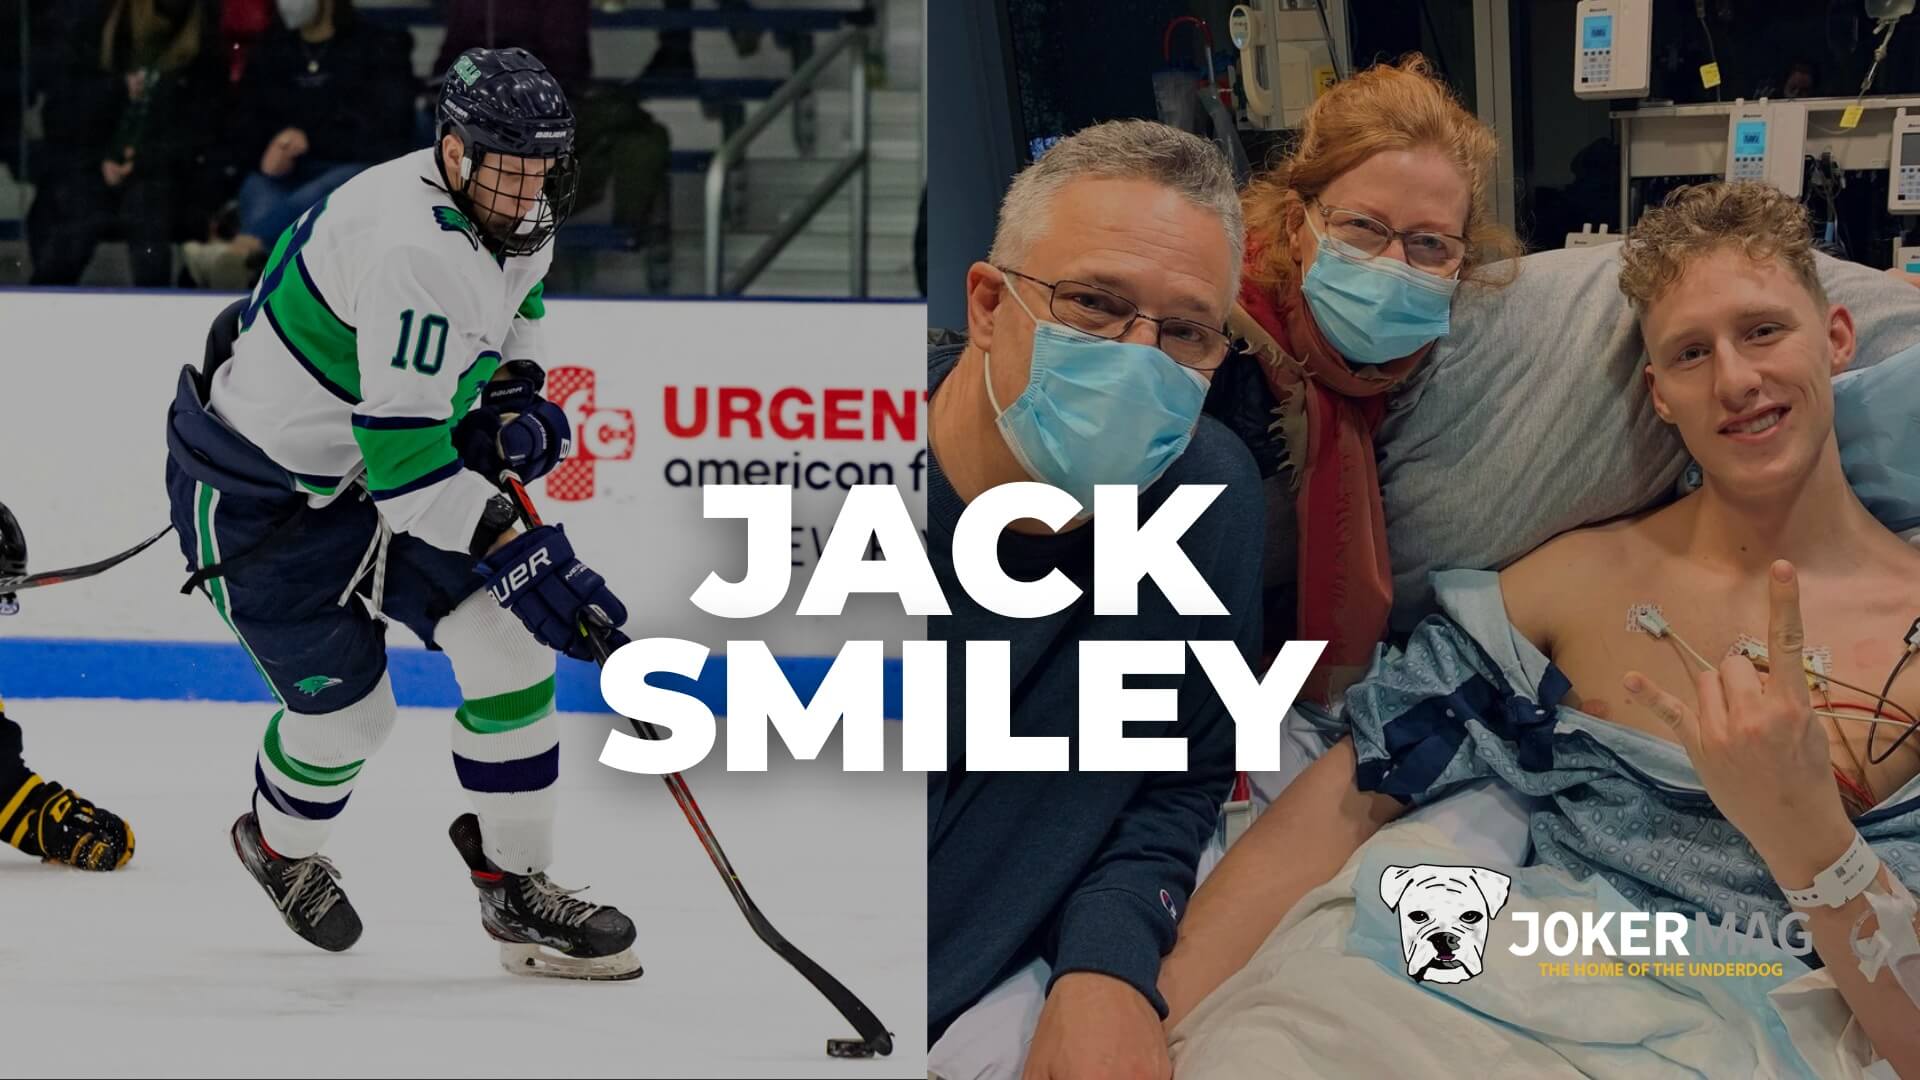 Jack Smiley, an Endicott College hockey player, joins us for an interview about his stroke recovery and positive mindset